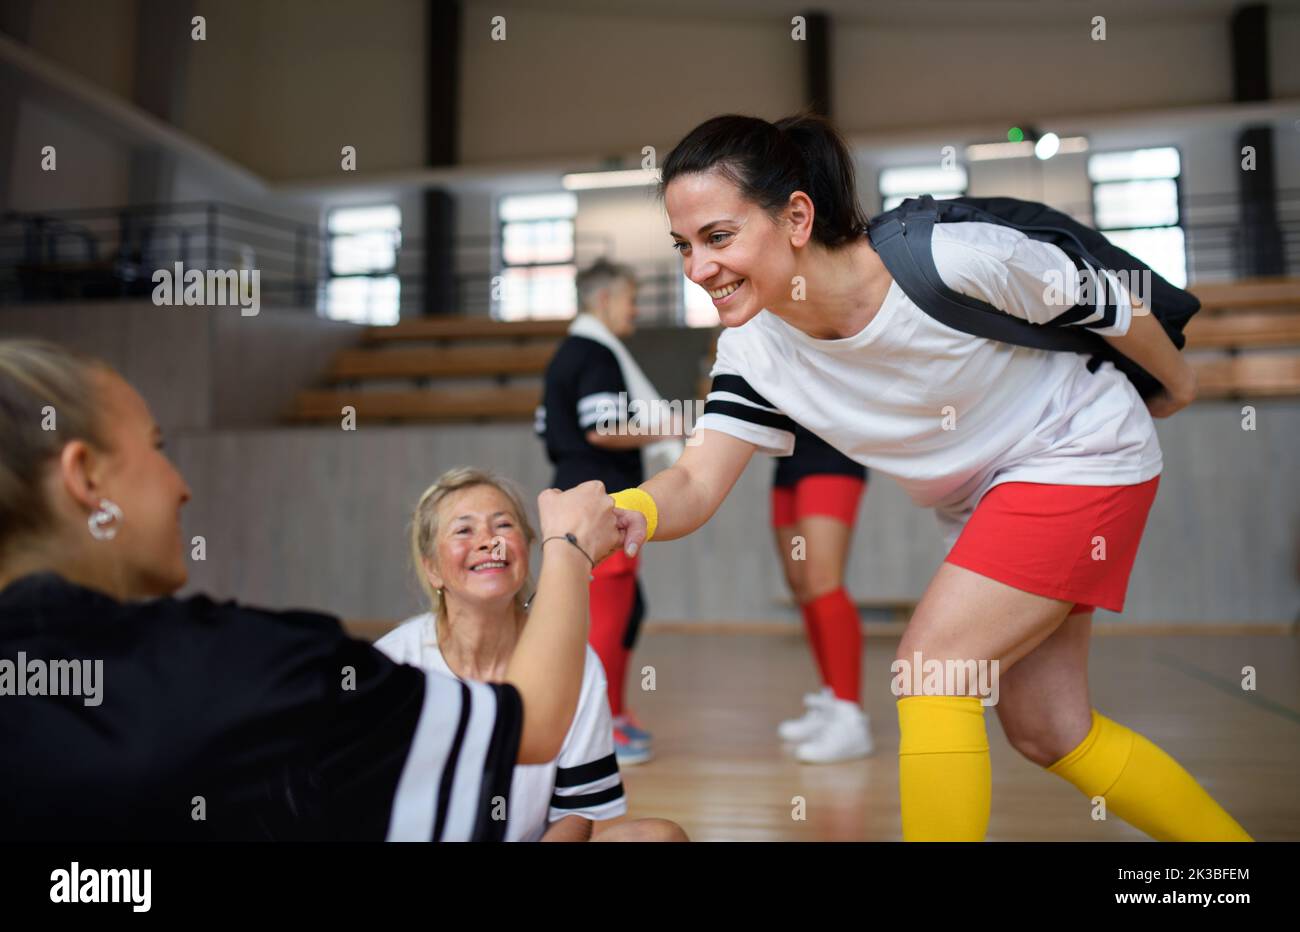 Multigenerational teammates greeting each other in gym. Stock Photo